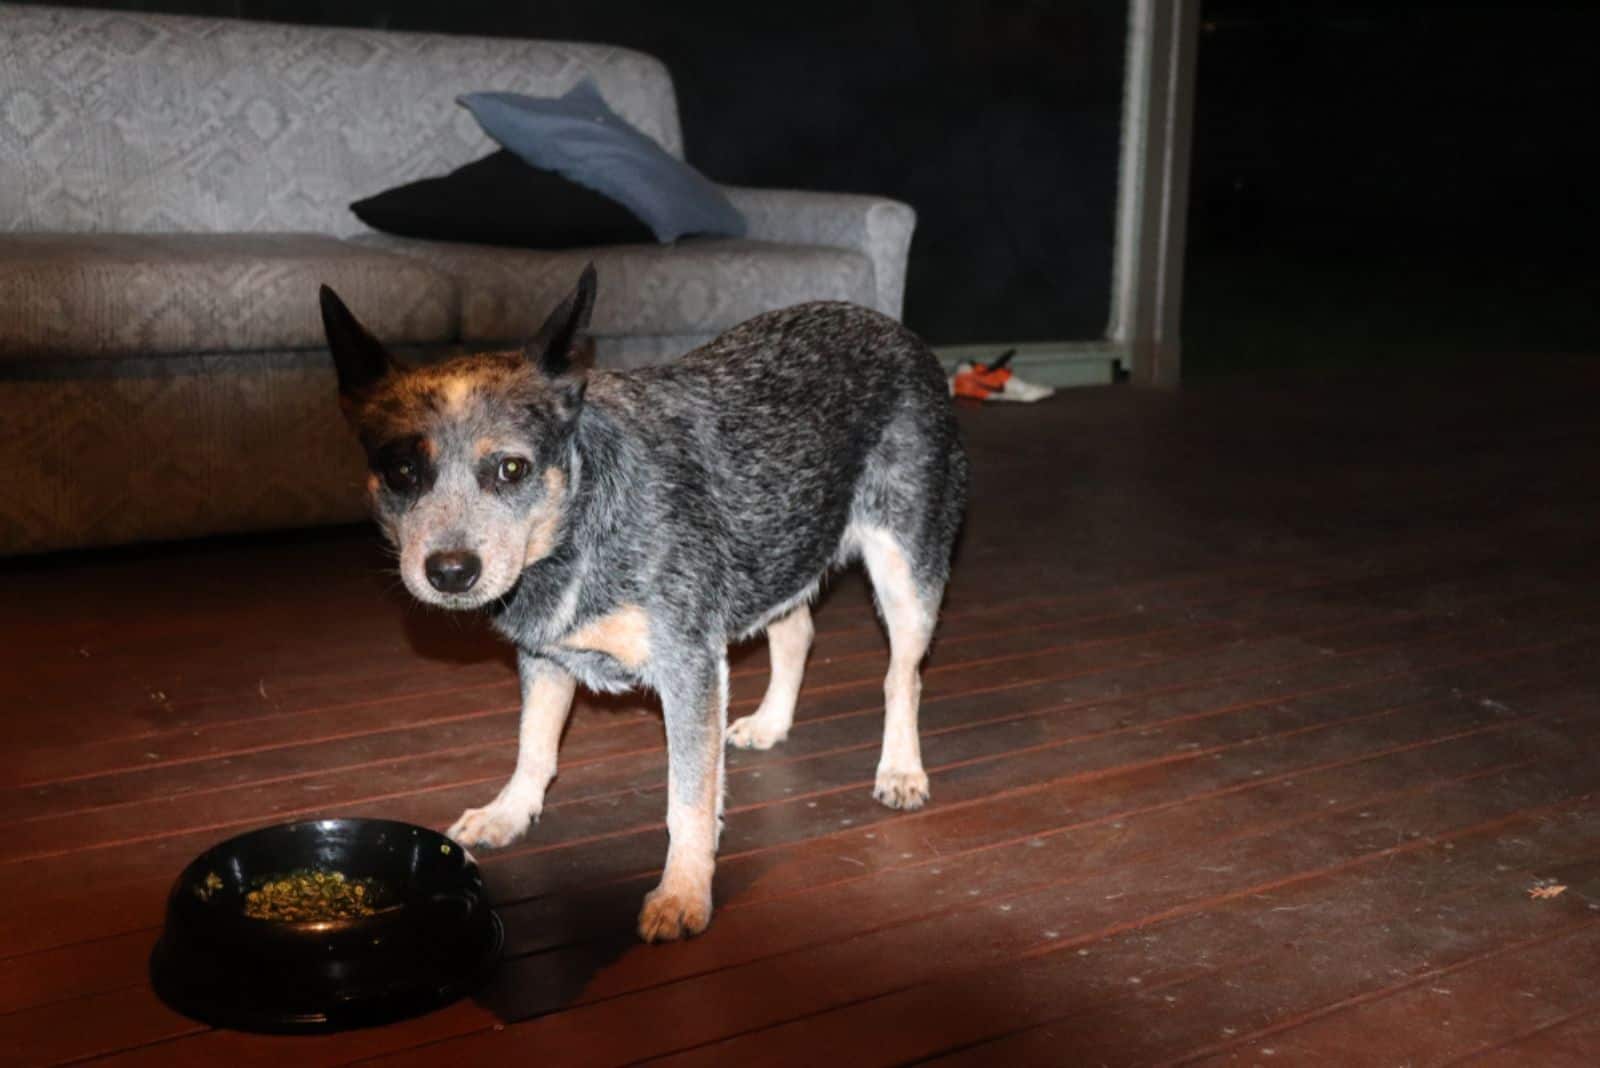 Blue Heeler stands next to the bowl of food